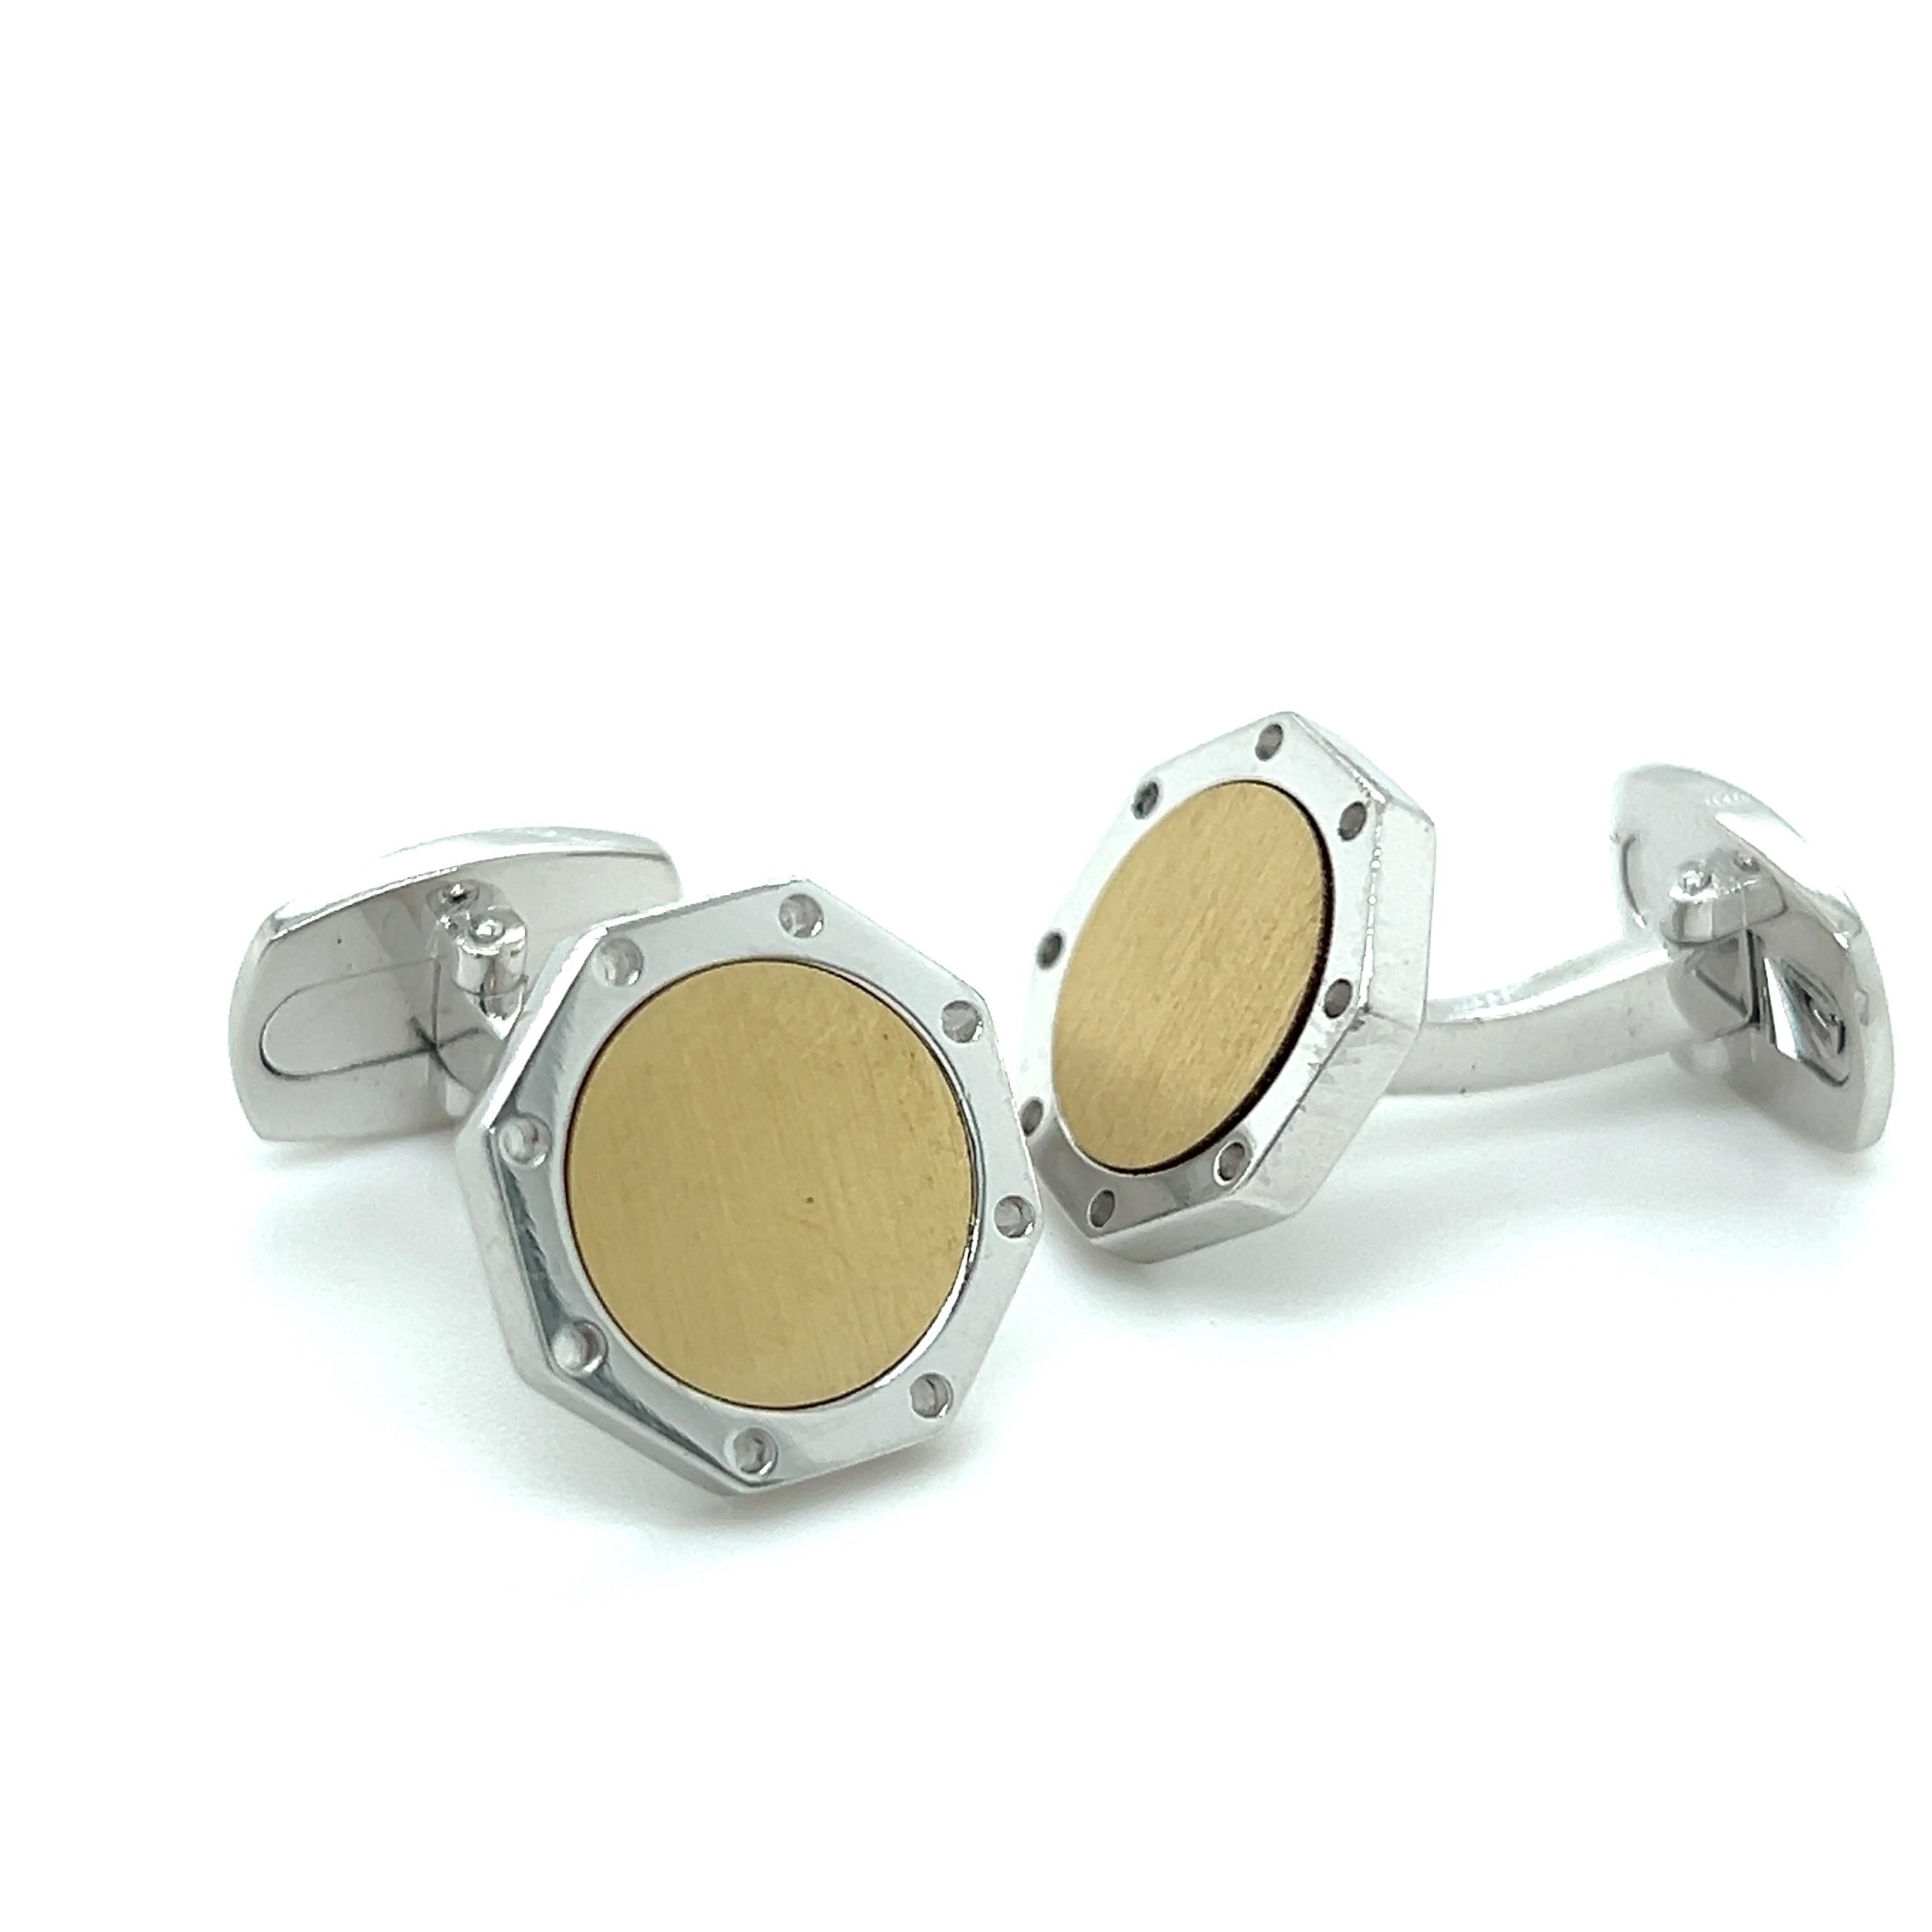 Chic and Timeless, Round Brushed 18Kt Yellow Gold in a Octagonal Shaped Polished, Mirror Finish, Sterling Silver Cufflinks, T-bar back.
In our smart fitted Black Box and pouch.
.
